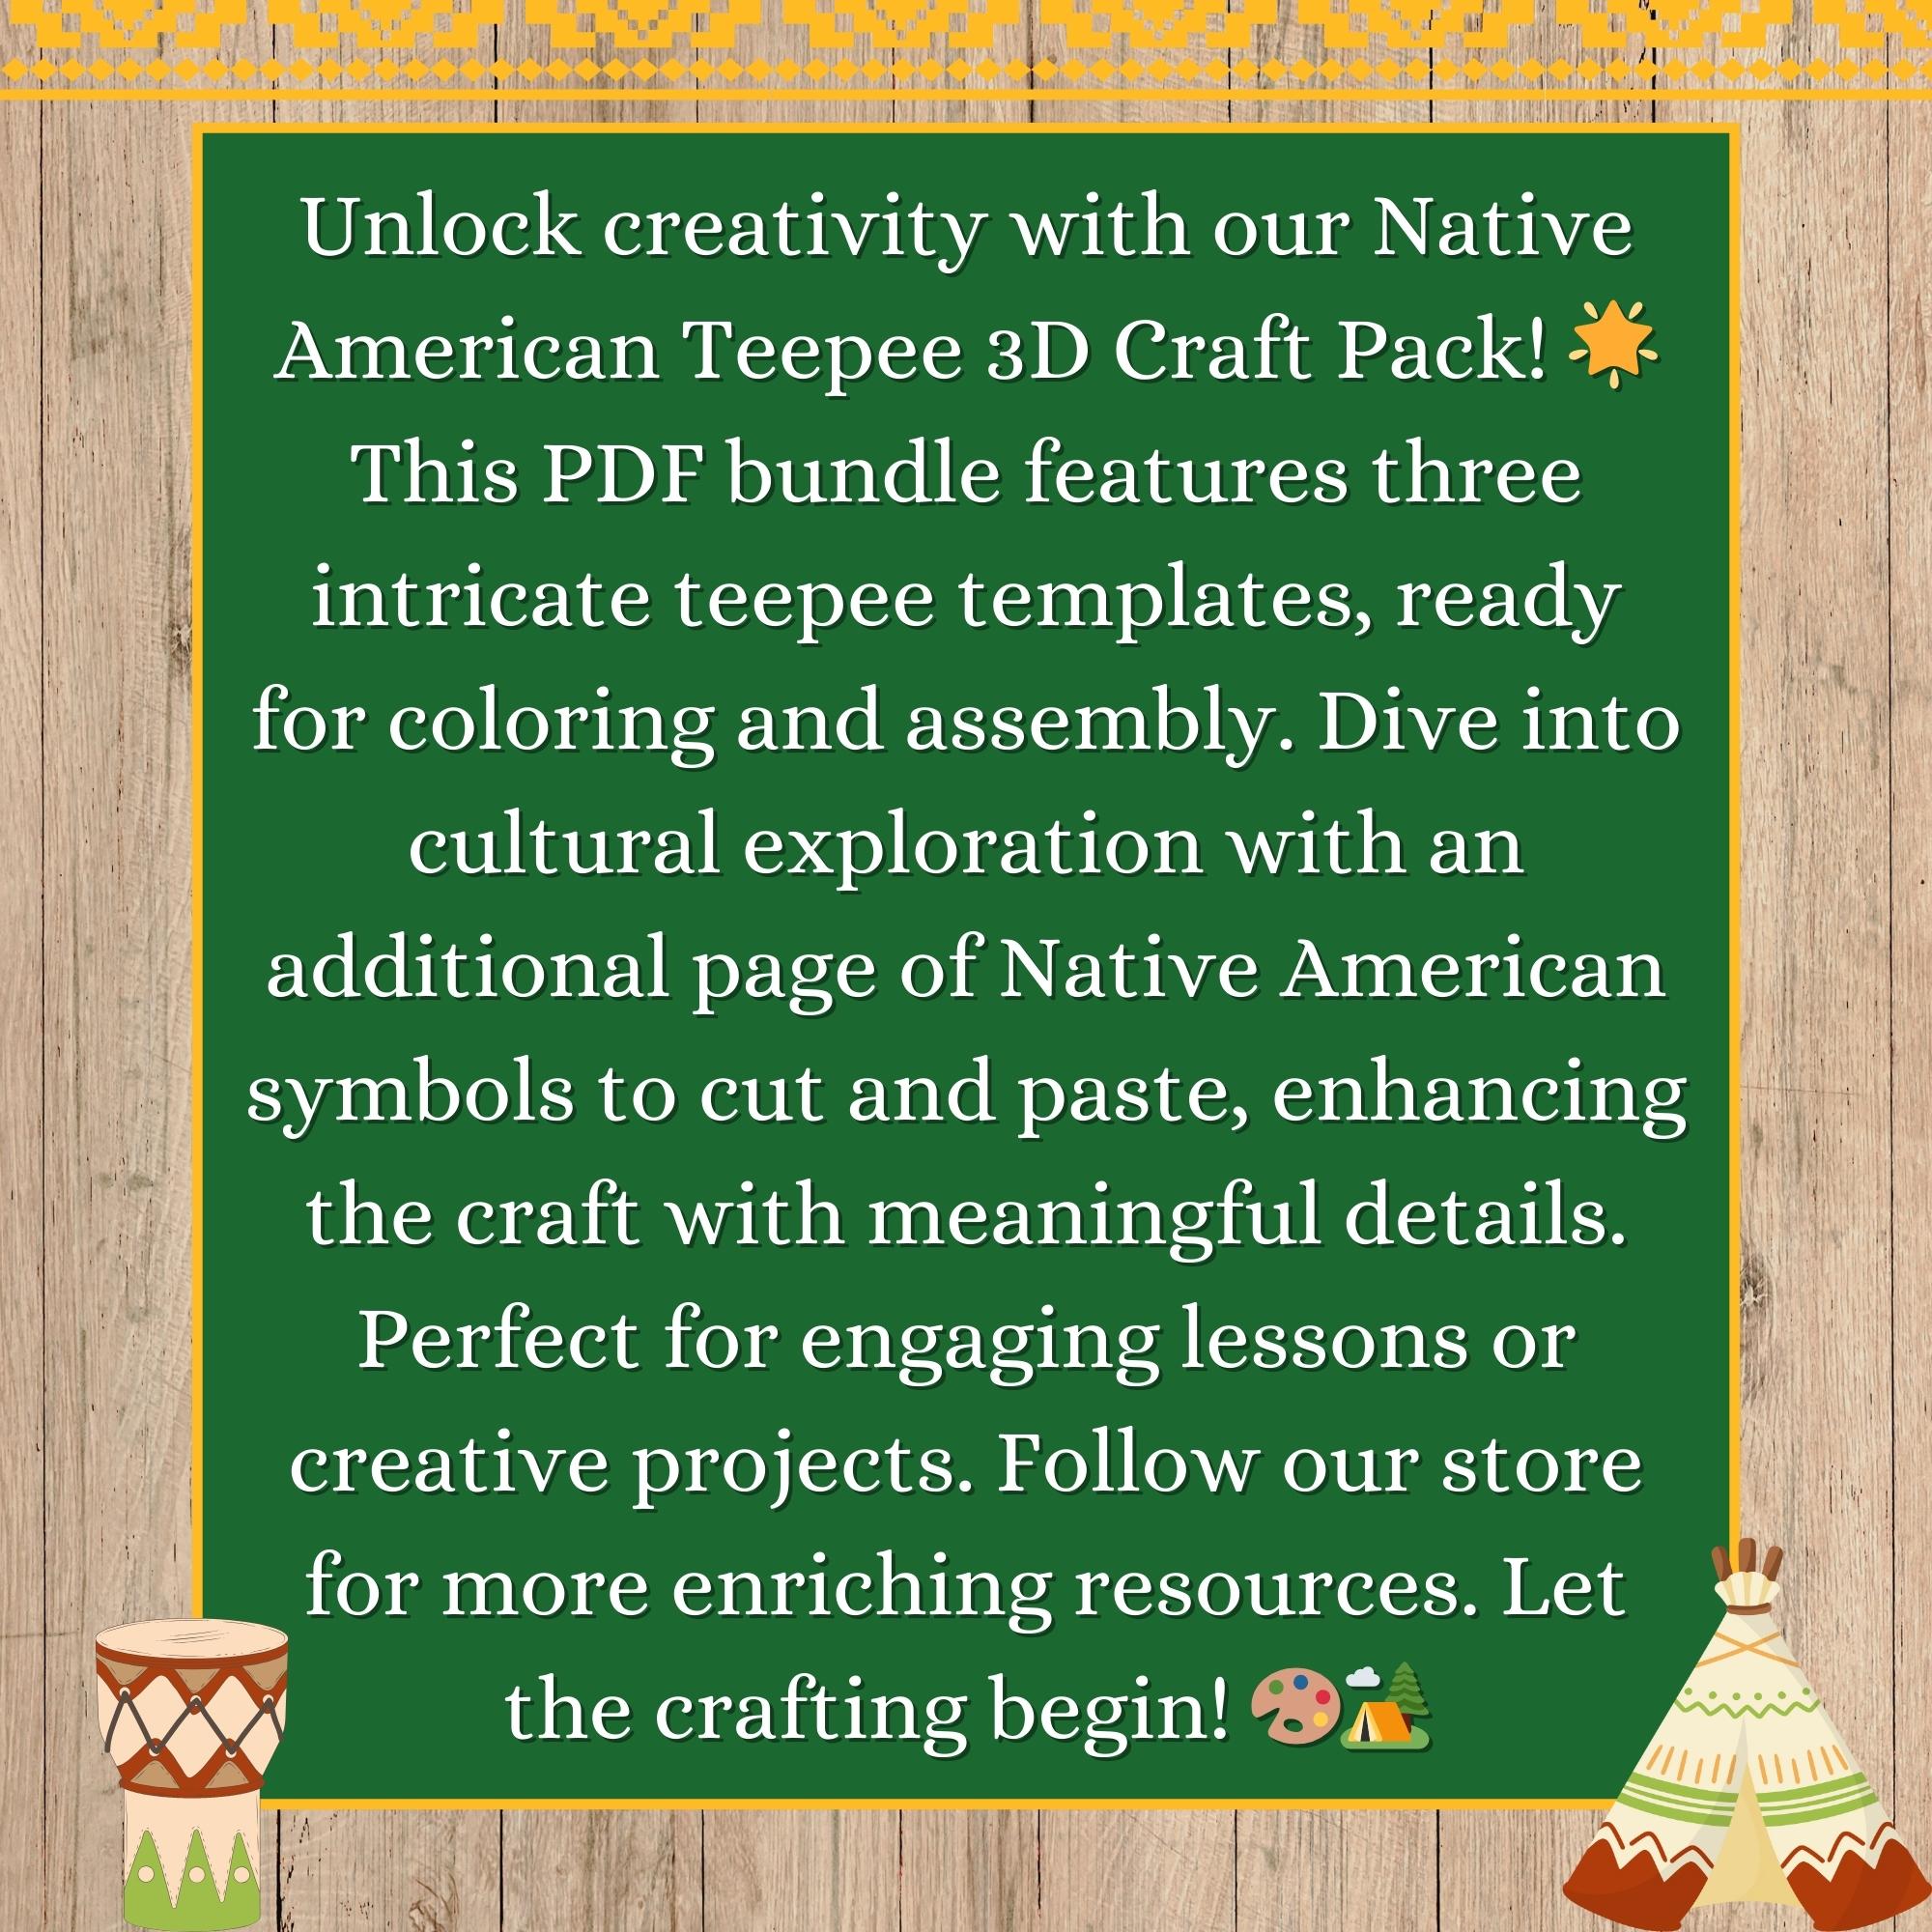 Build a d teepeetipi native americans craftsymbols design a teepee template scissor practice made by teachers